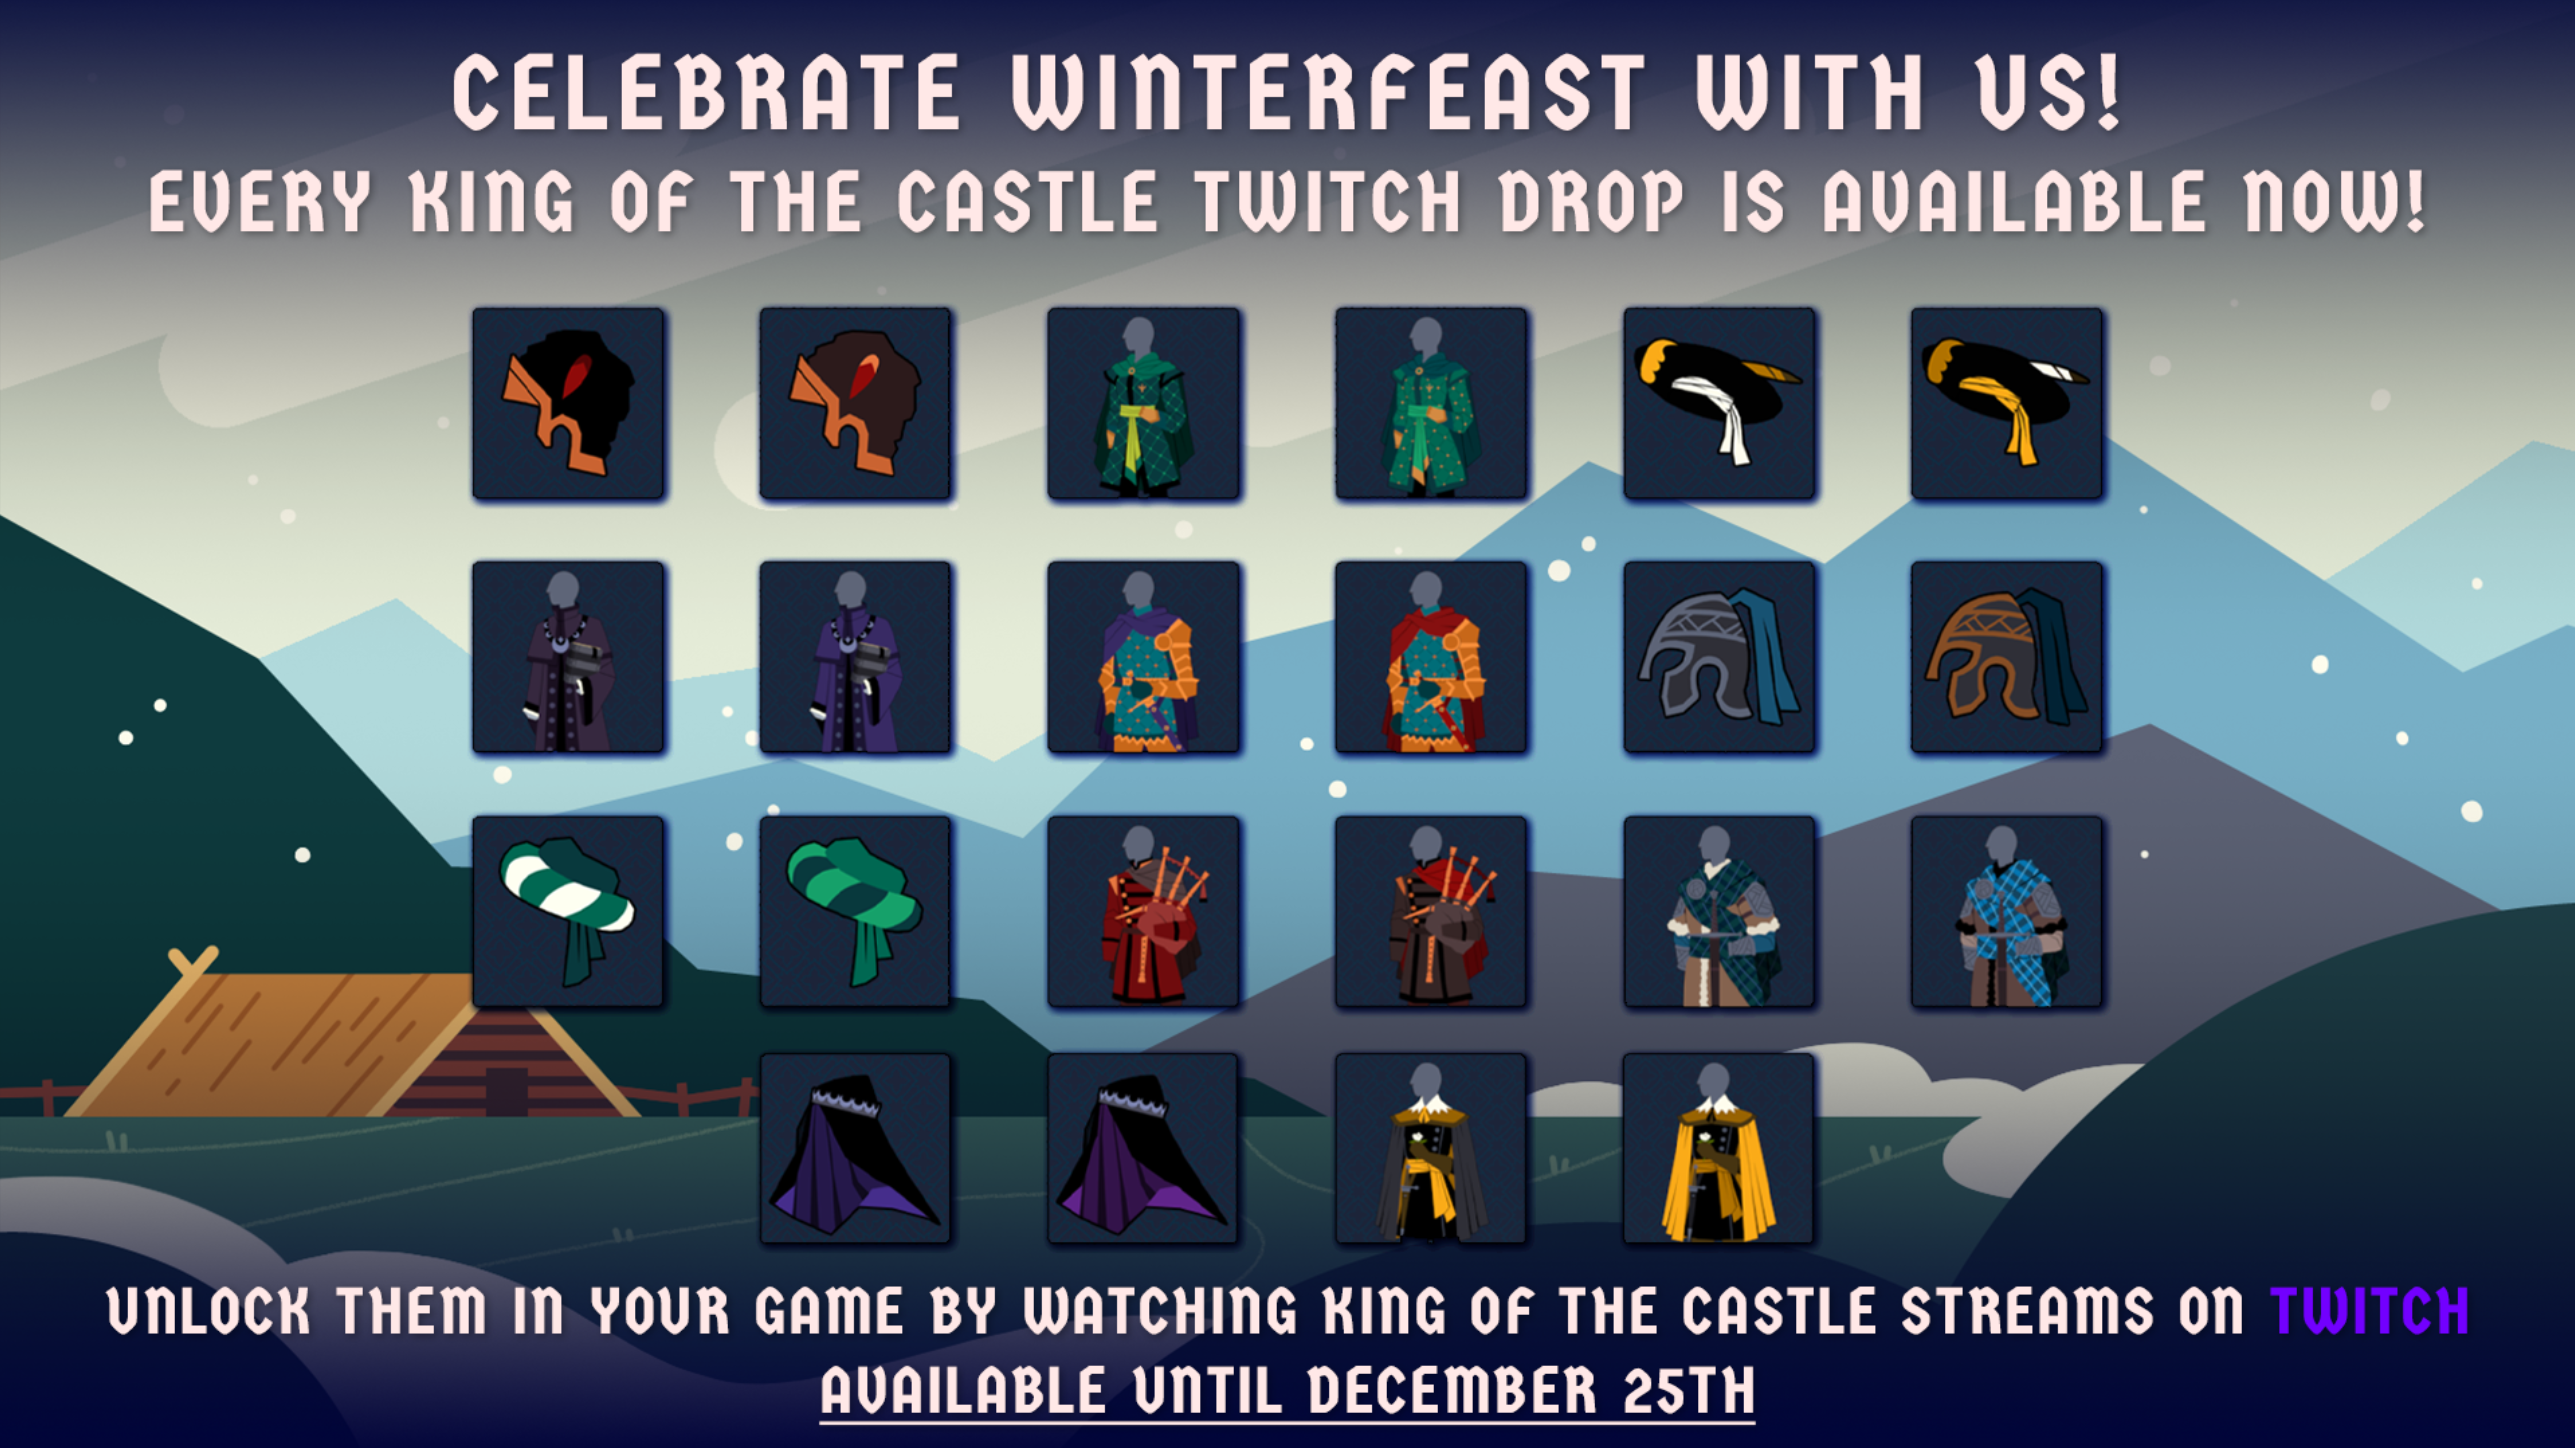 King of the Castle Demo coming to Steam Next Fest! - Team17